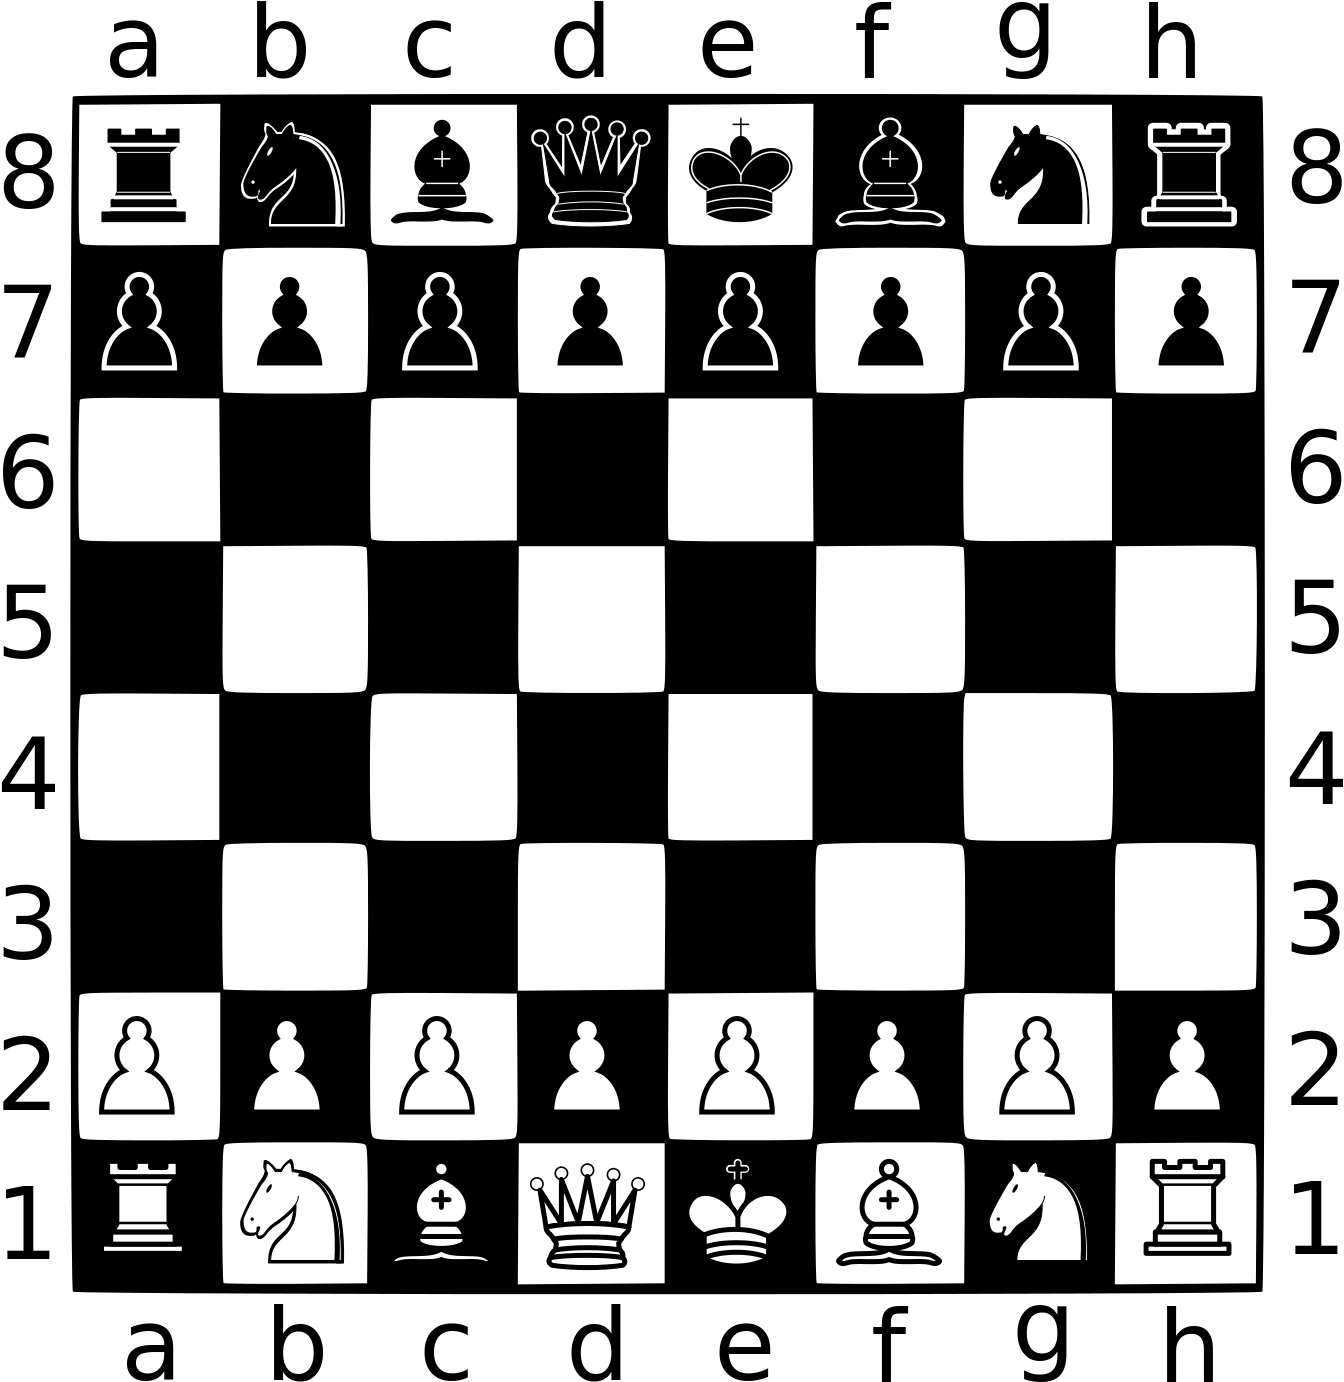 A Black And White Background With White Chess Pieces